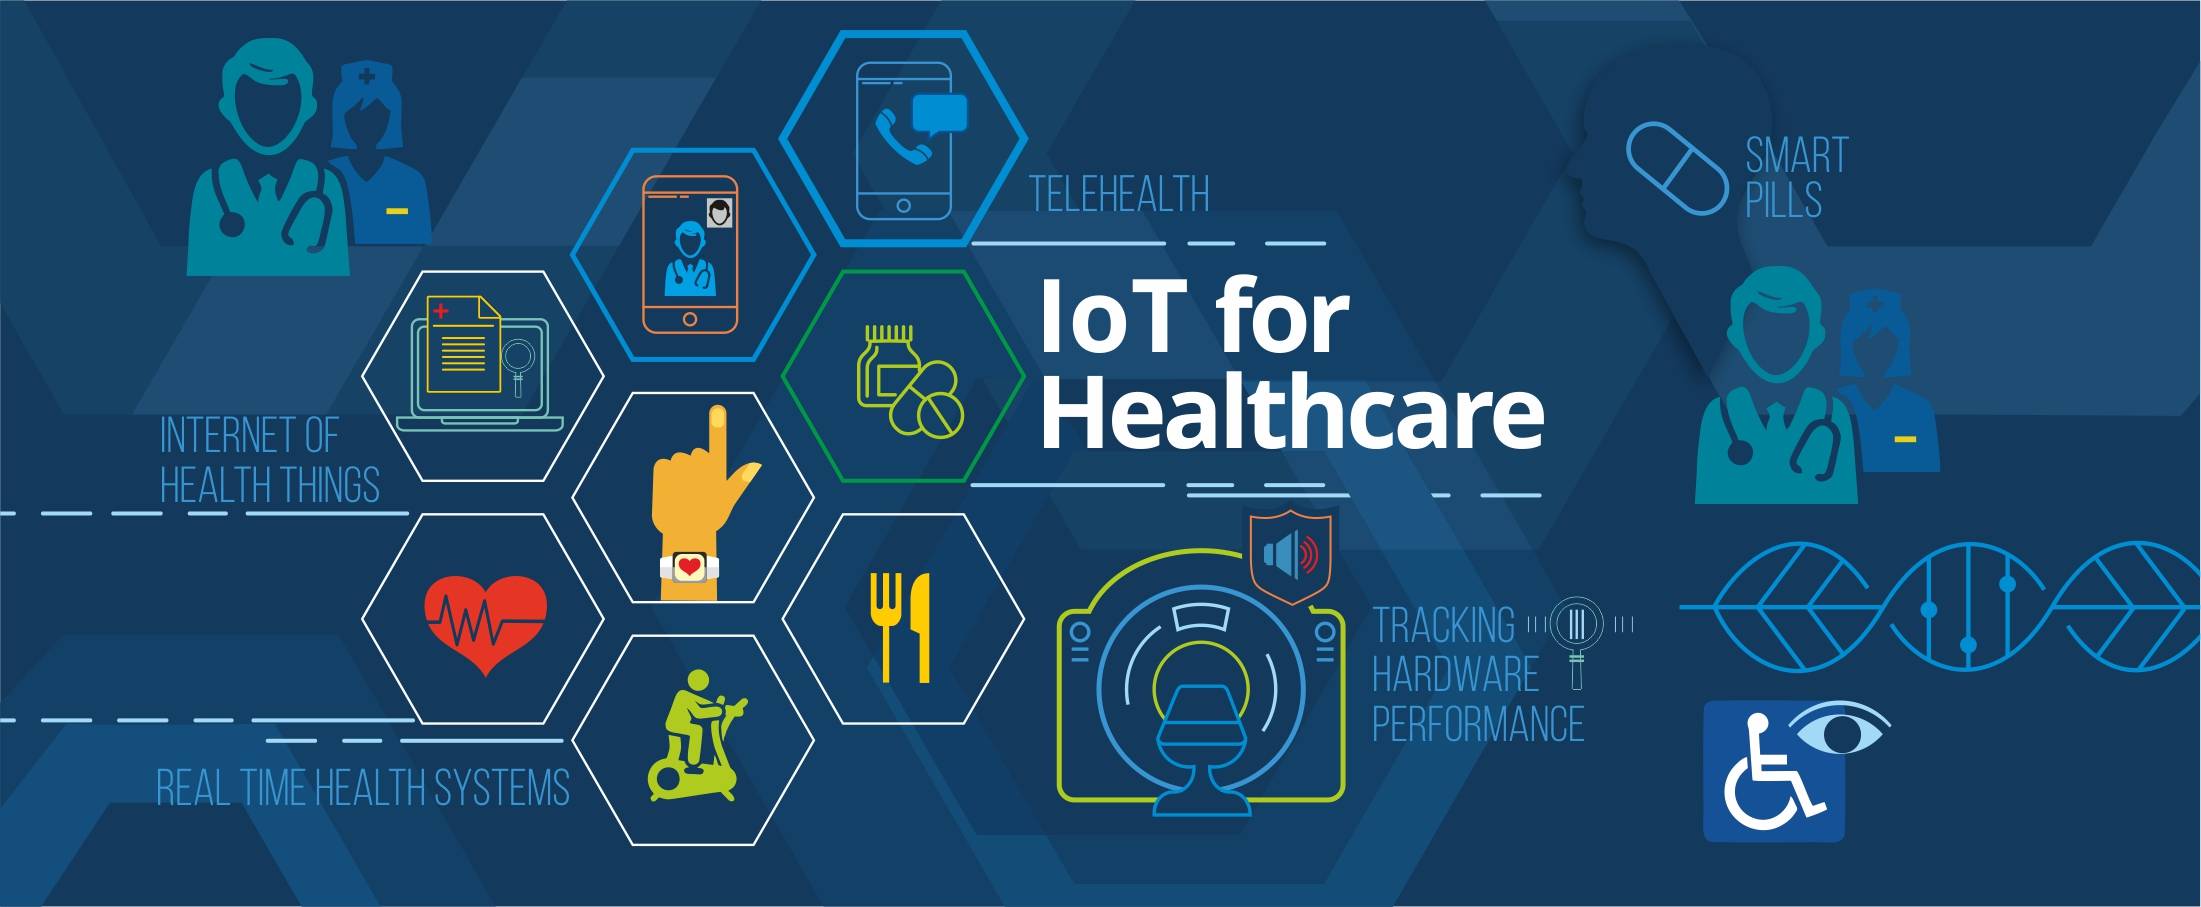 The Internet of Things in Healthcare - Opportunities and Limitations